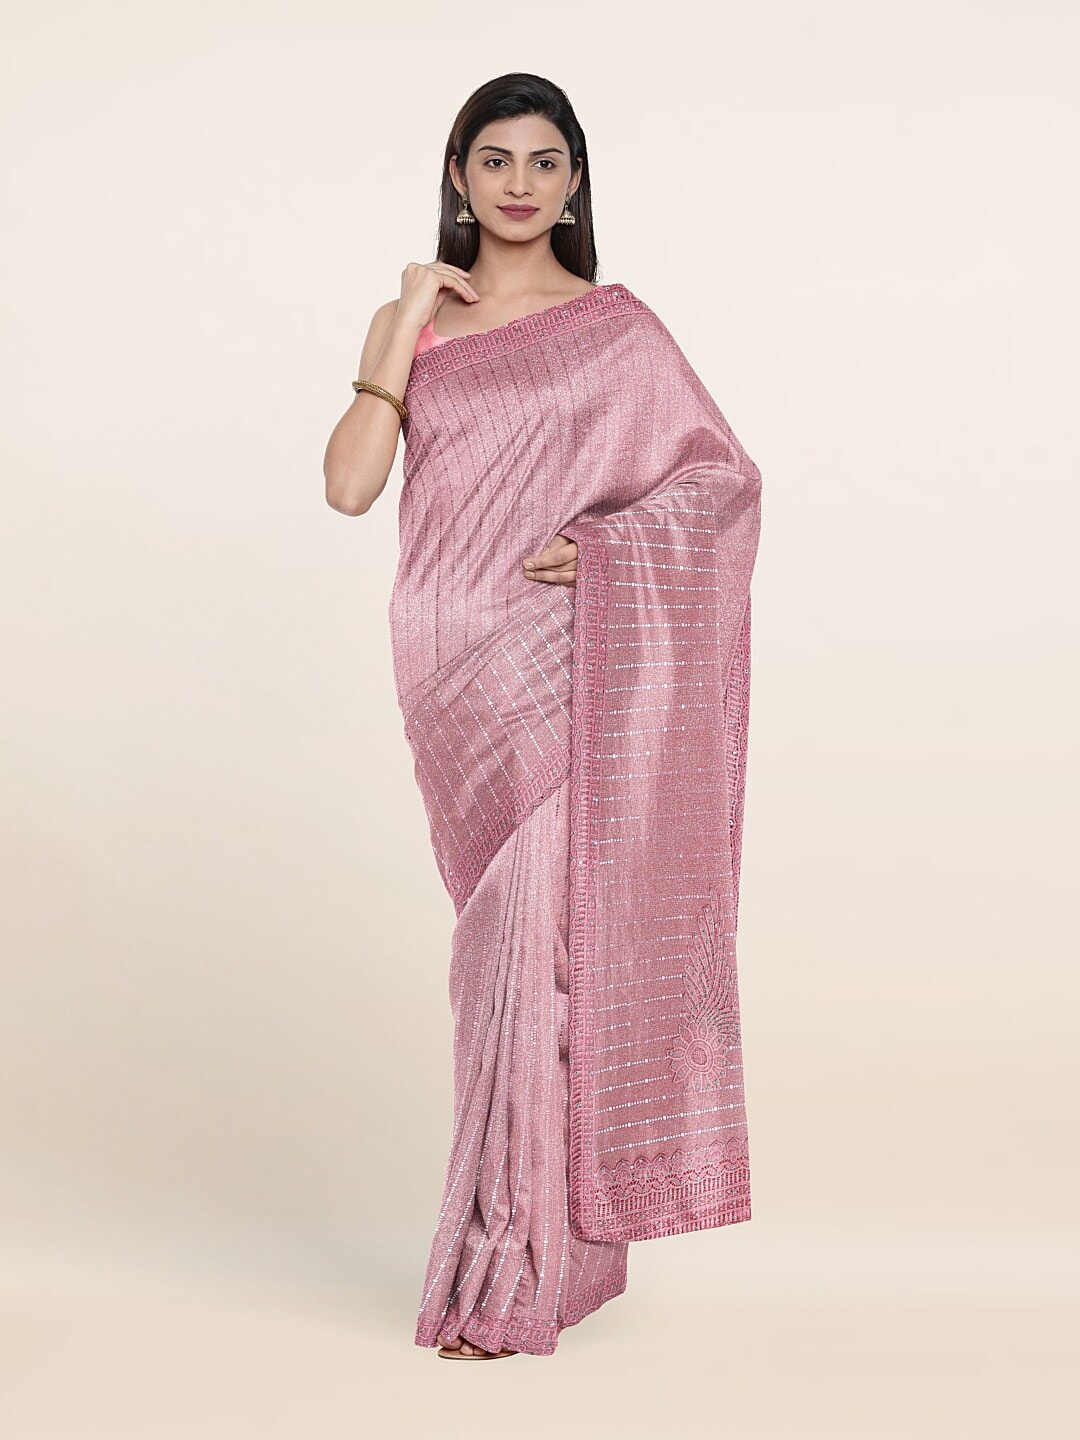 Pothys Pink & White Floral Embellished Beads and Stones Saree Price in India